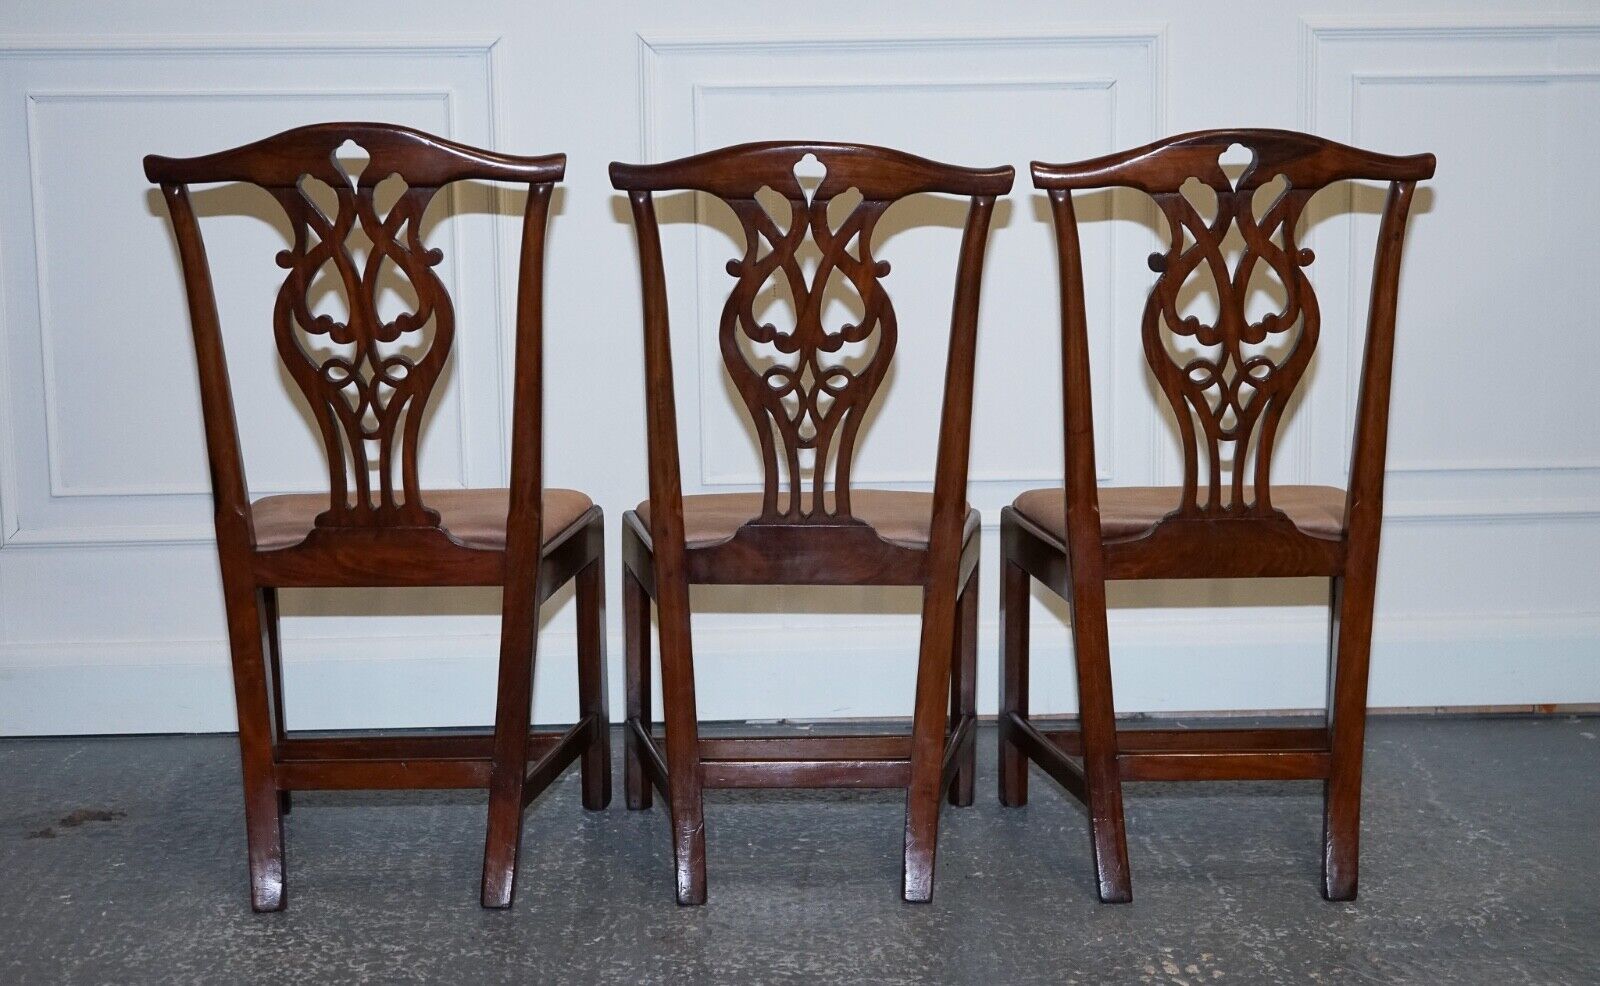 LOVELY CHIPPENDALE STYLE SET OF 6 DINING CHAIS H FRAME